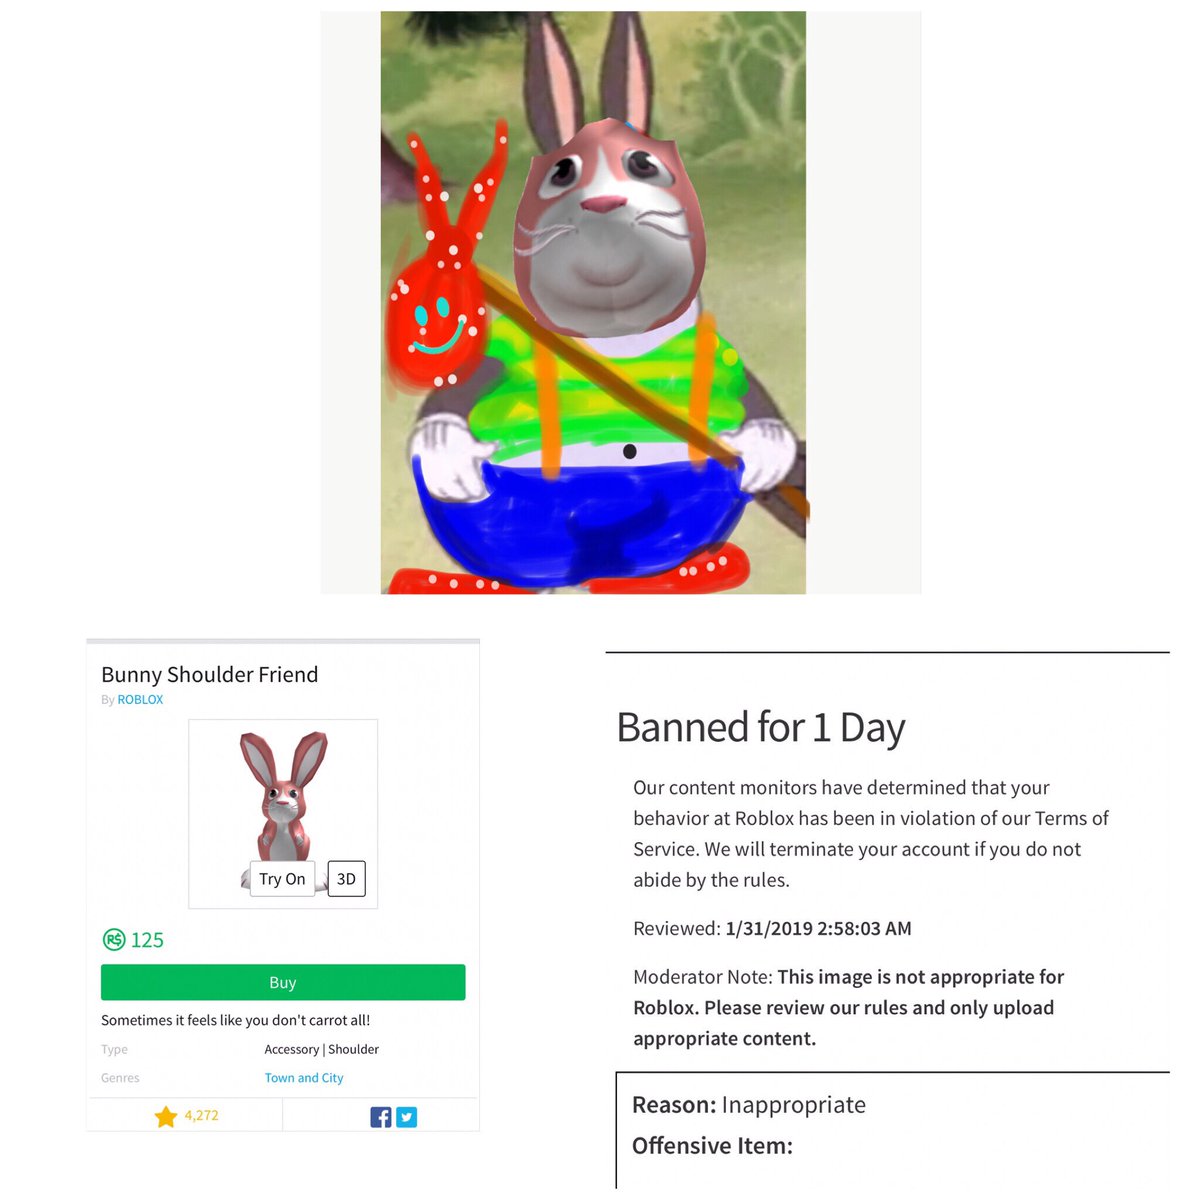 Hello Entertainment Bloxyawards Bloxys Roblox On Twitter Roblox Fat Shames And Discriminates Against Diverse Plus Sized Images Of Body Positivity Bans Its Own Pink Bunny In T Shirt Collage Image Https T Co Ikc9rojtxk - fat body goes with fat head roblox